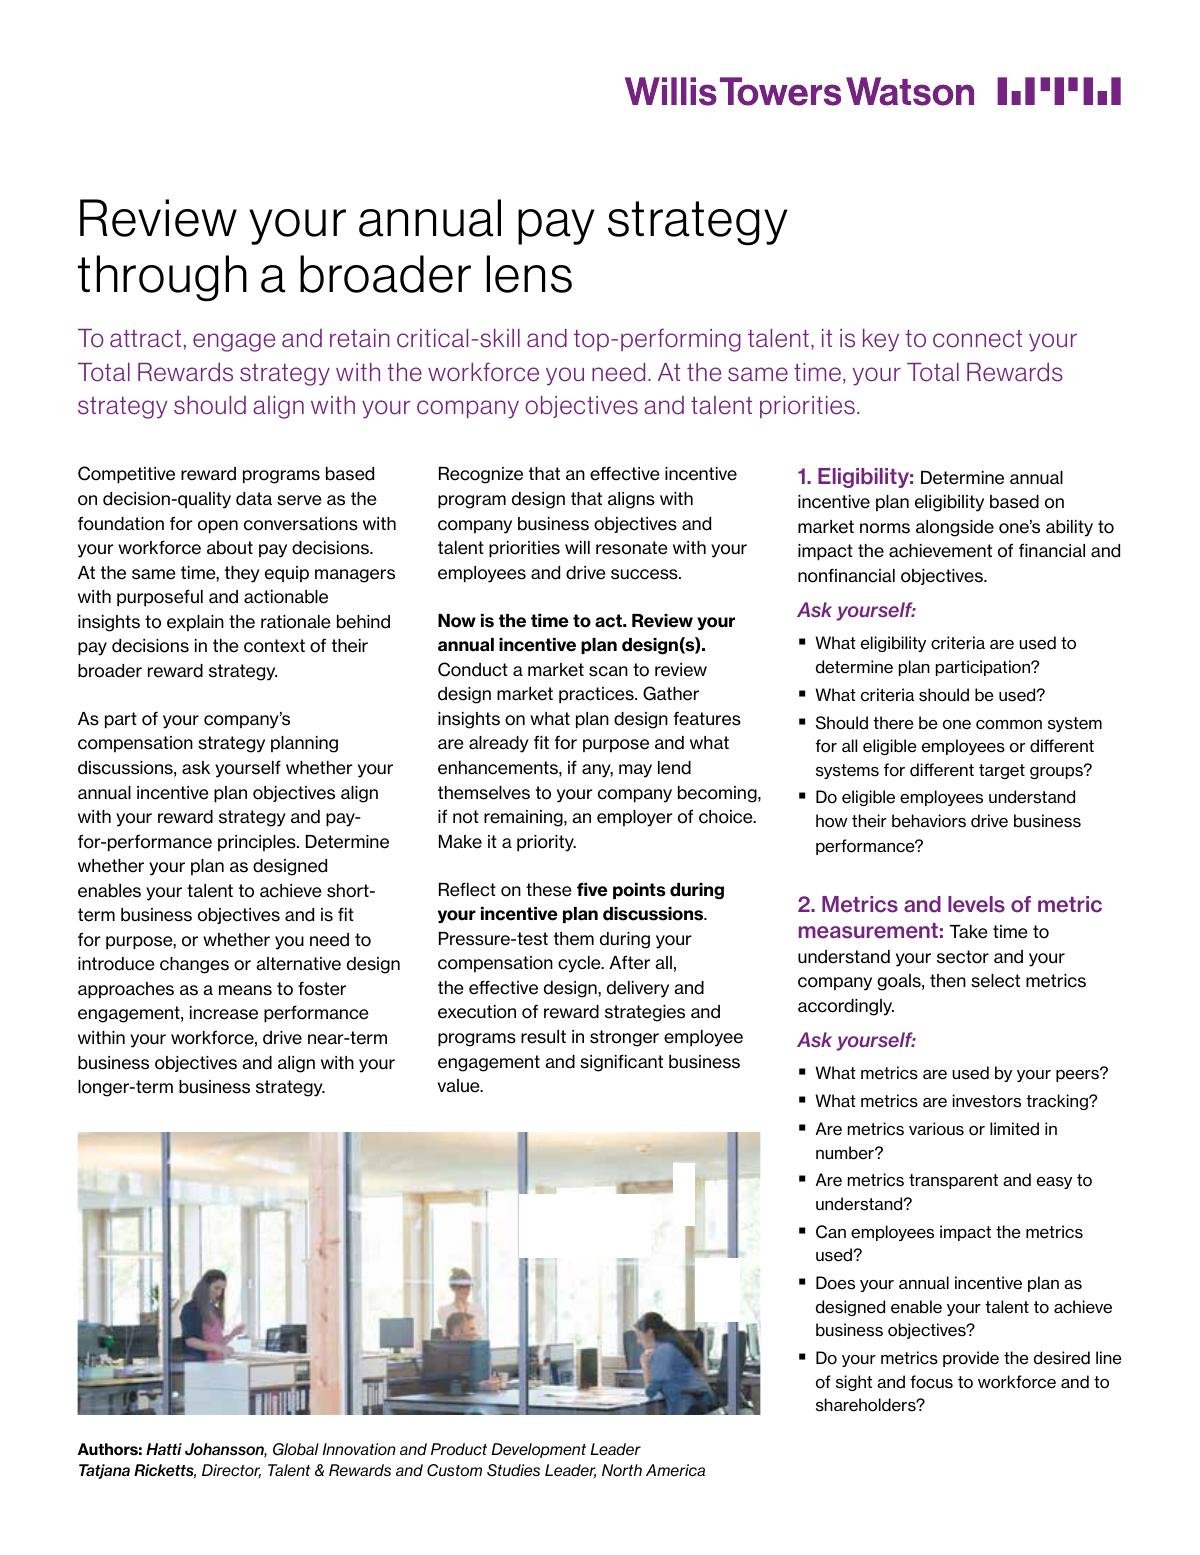 Review your Annual Pay Strategy through a Broader Lens